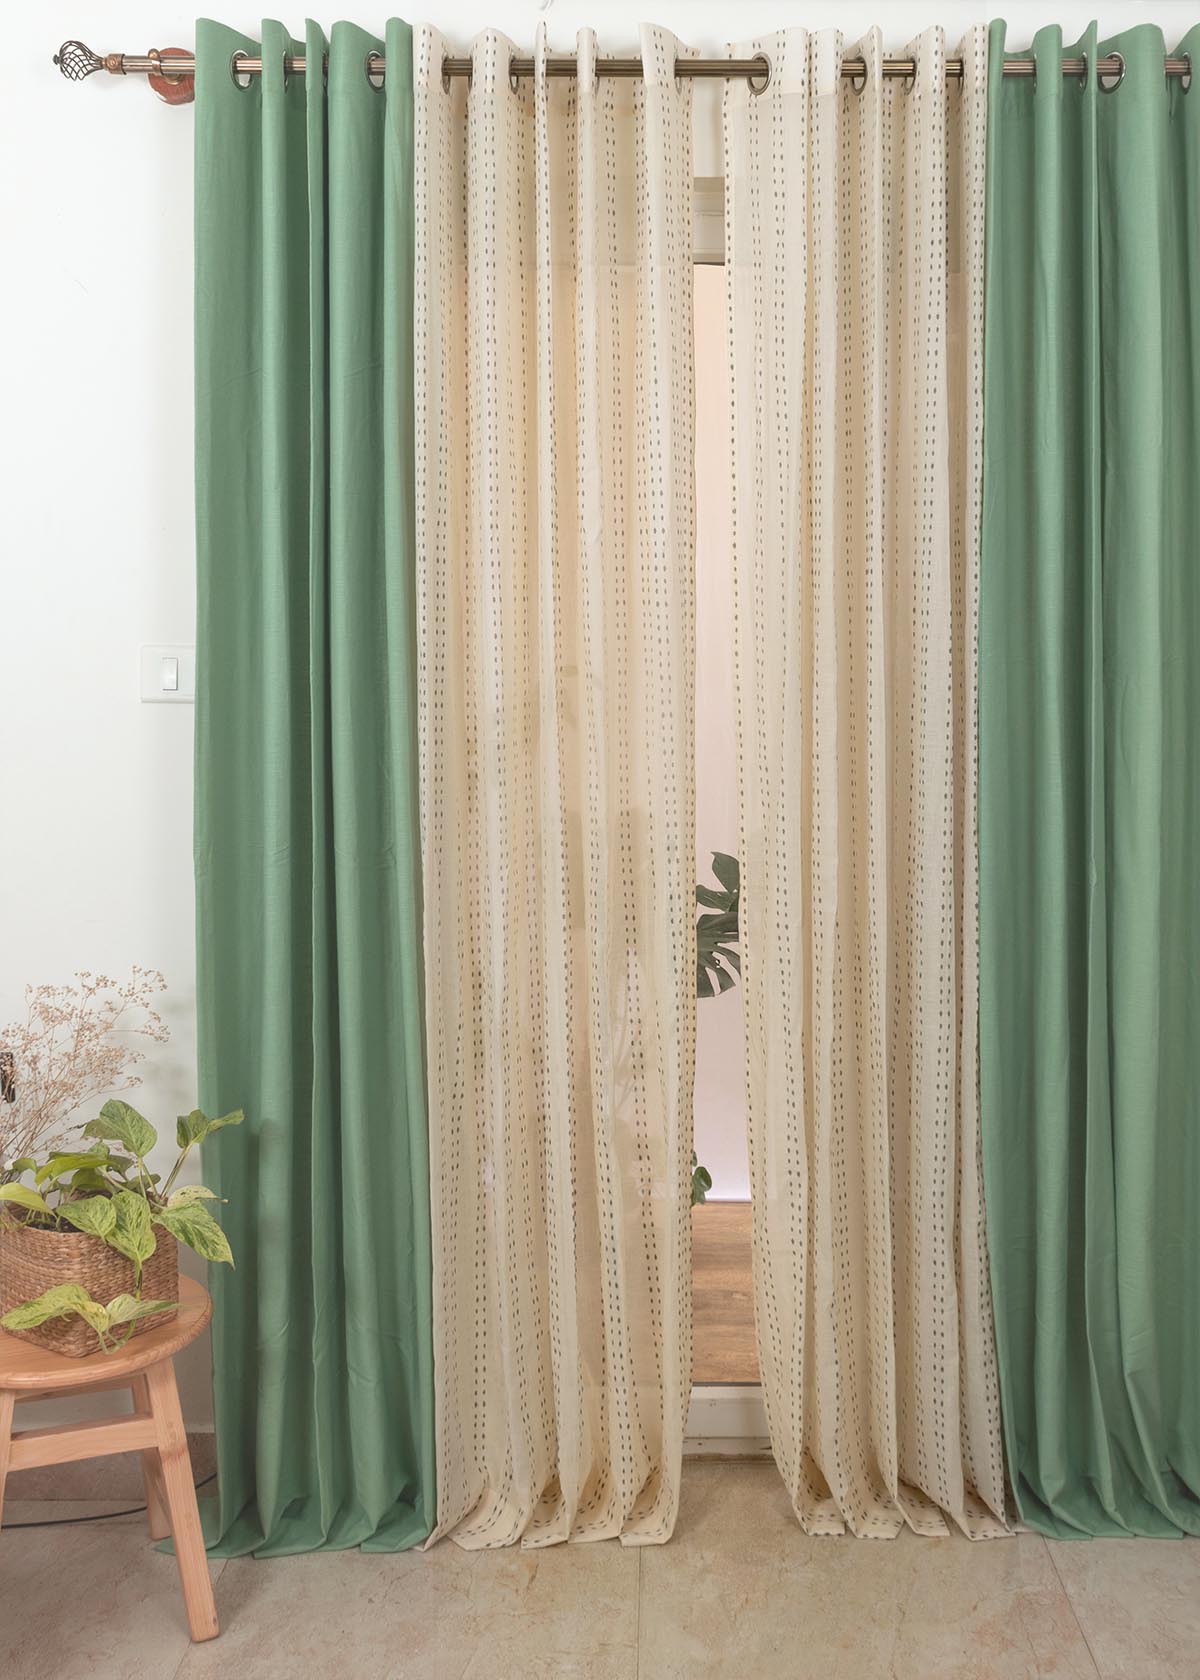 Sage Green Solid, Dew Sheer Set Of 4 Combo Cotton Curtain - Sage Green And Cream